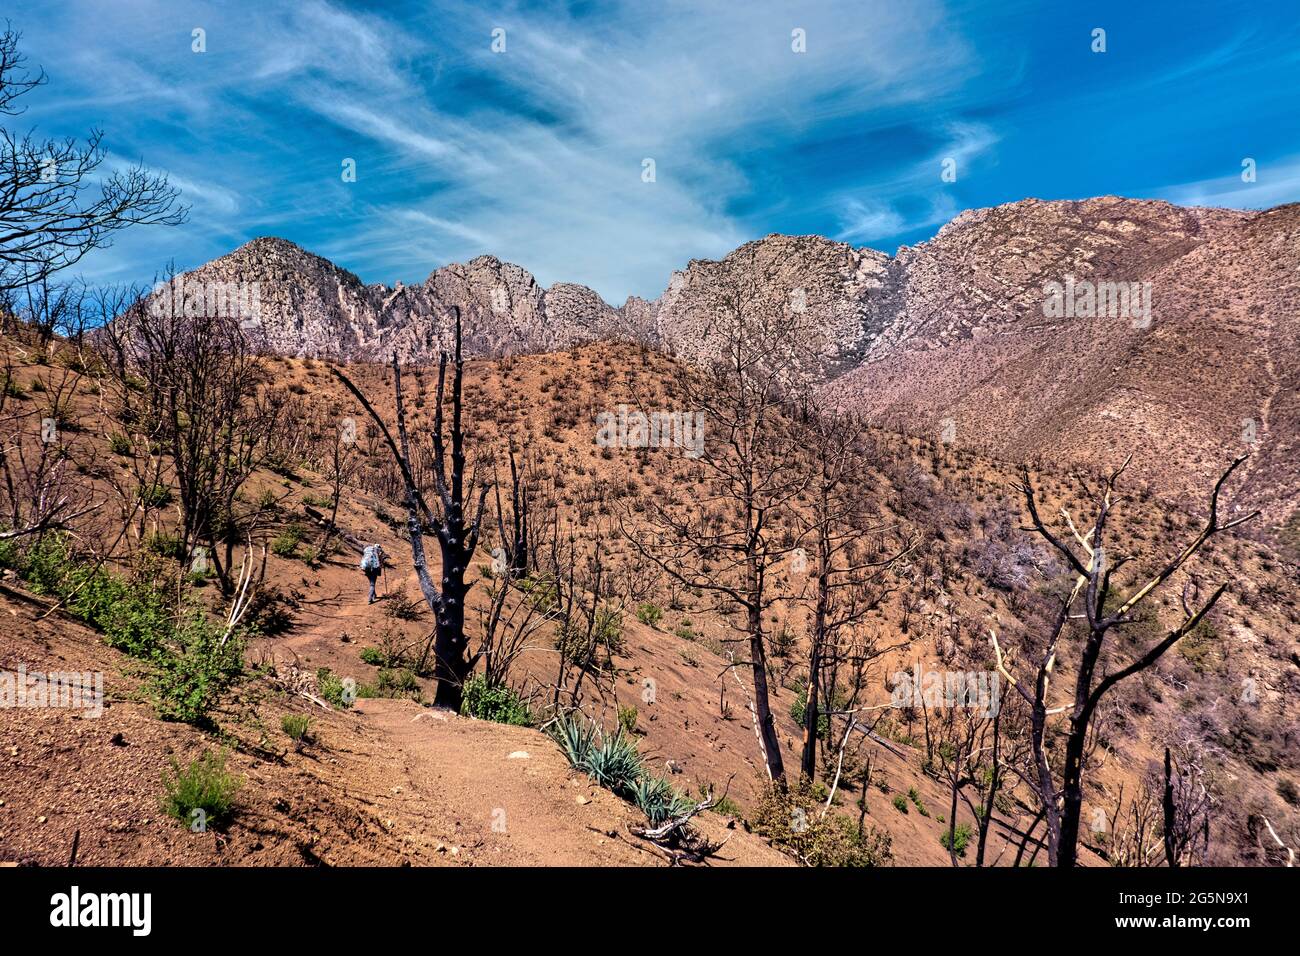 Backpacking the Four Peaks Wilderness, Tonto National Forest, Arizona, USA Stockfoto